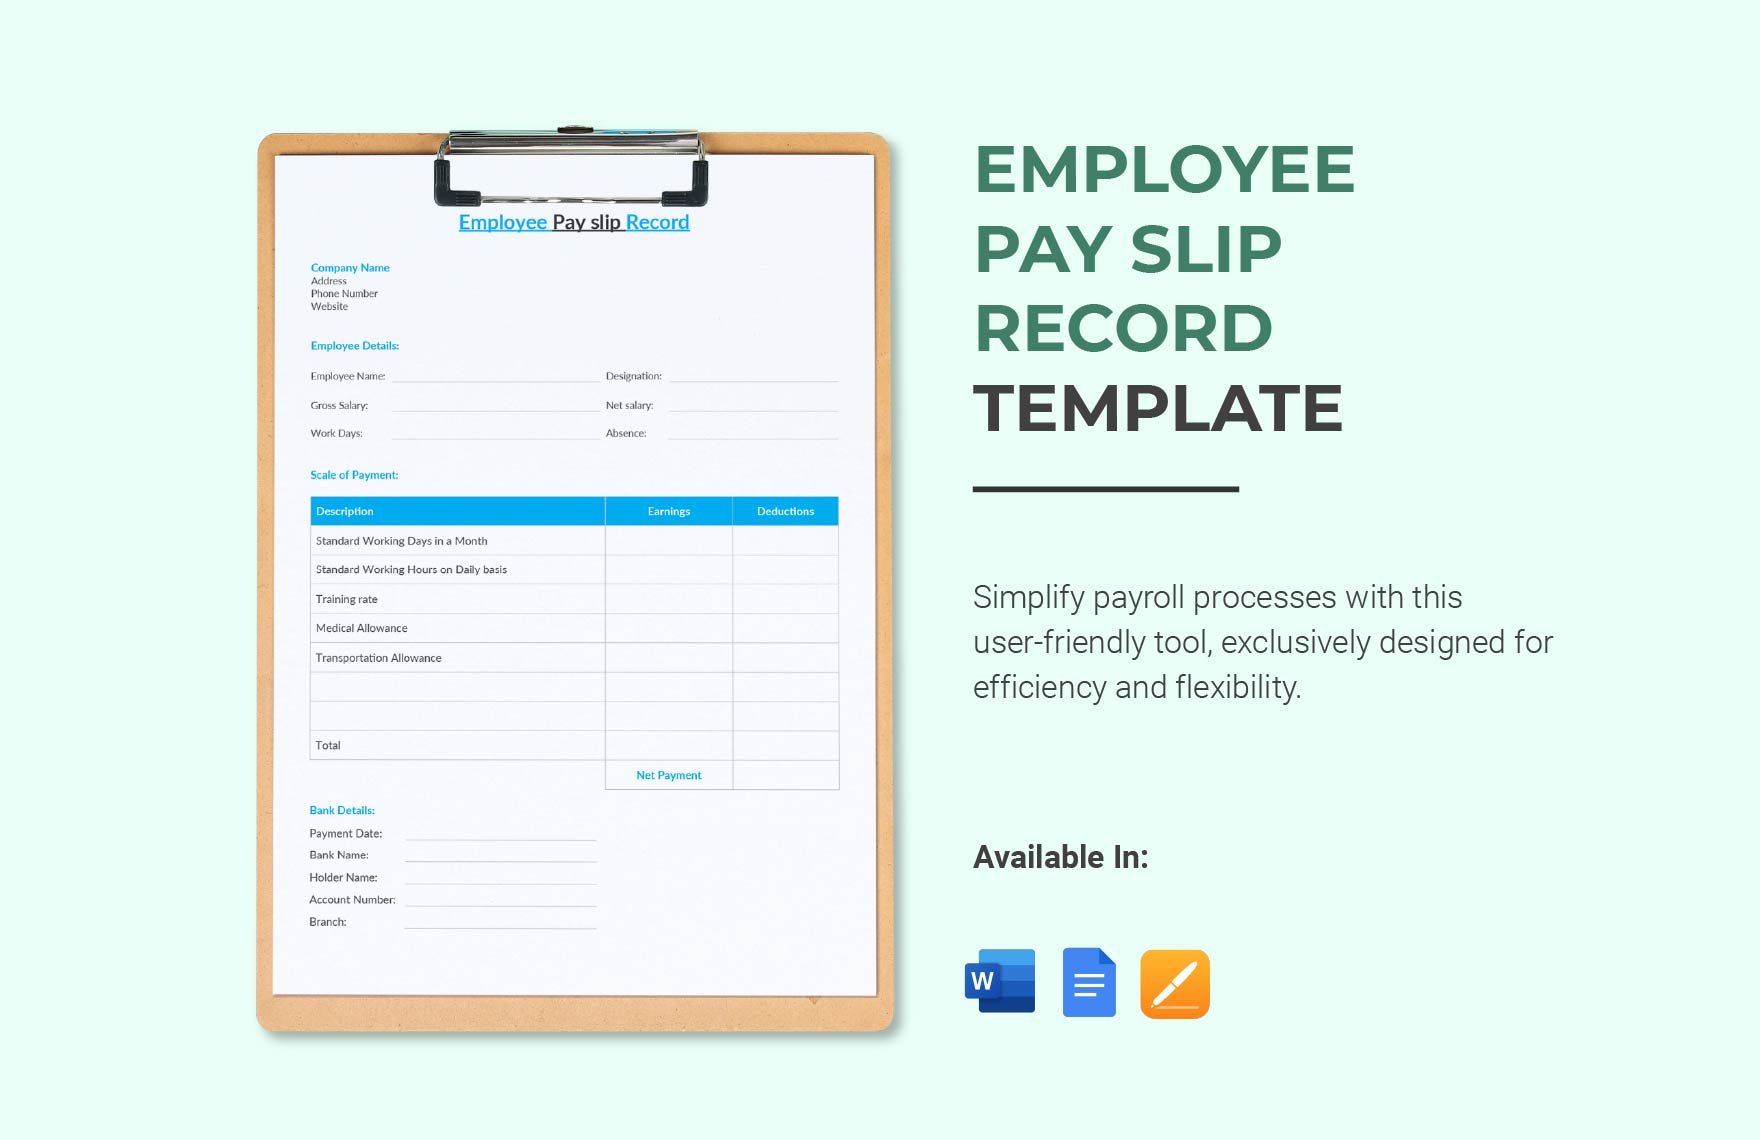 Employee Pay Slip Record Template